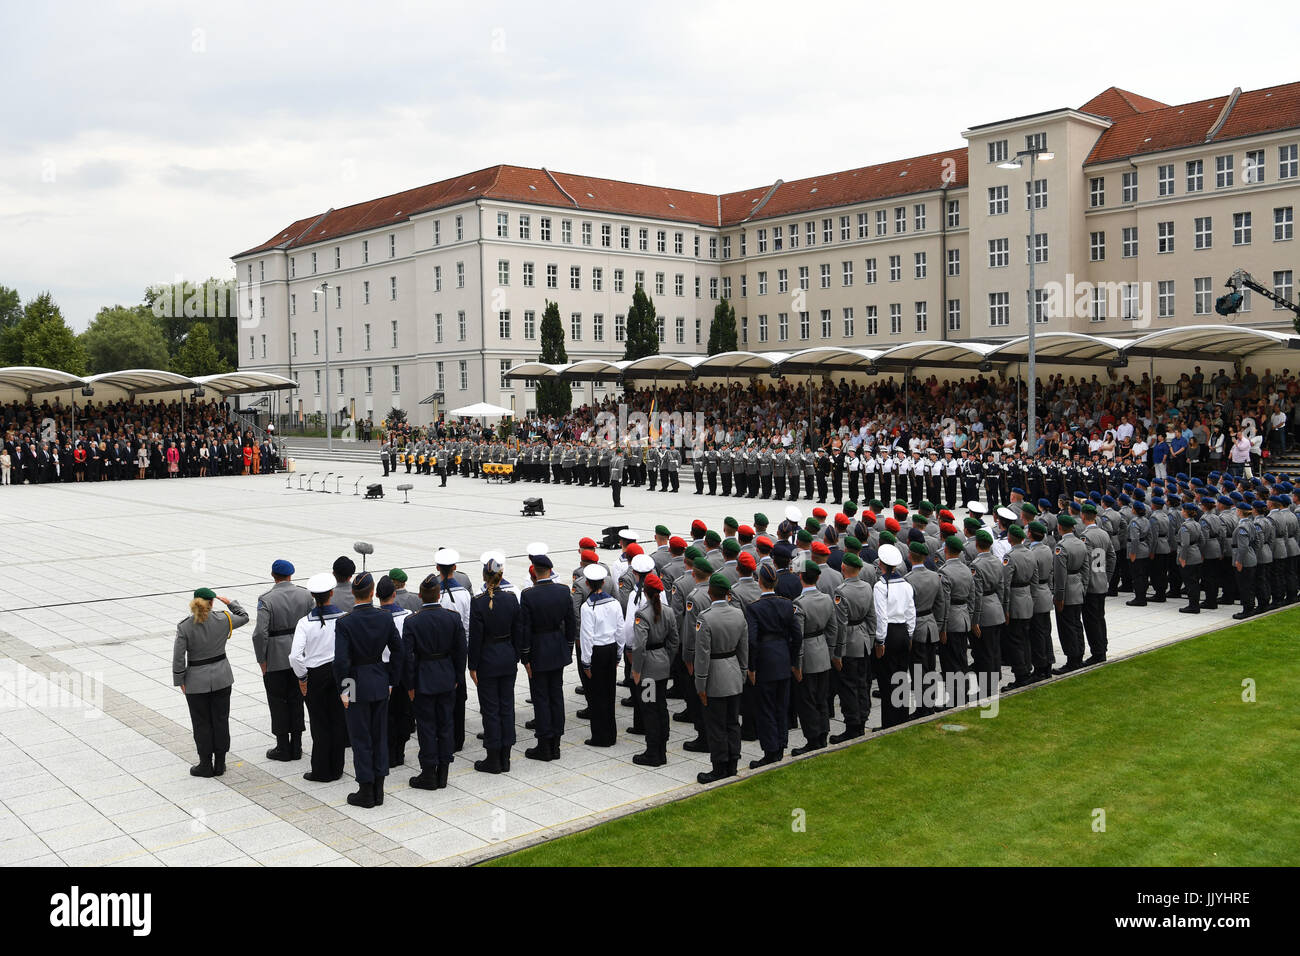 Berlin, Germany. 20th July, 2017. The guard battalion (R) and the recruits of the German Armed Forces seen prior to the swearing-in ceremony on the Bendlerblock parade ground in Berlin, Germany, 20 July 2017. 400 recruits were sworn in during a ceremony on the 73rd anniversary of the 20 July plot, an attempt launched by a group of conspirators to assassinate Adolf Hitler, leader of Nazi Germany at that time. Photo: Soeren Stache/dpa/Alamy Live News Stock Photo